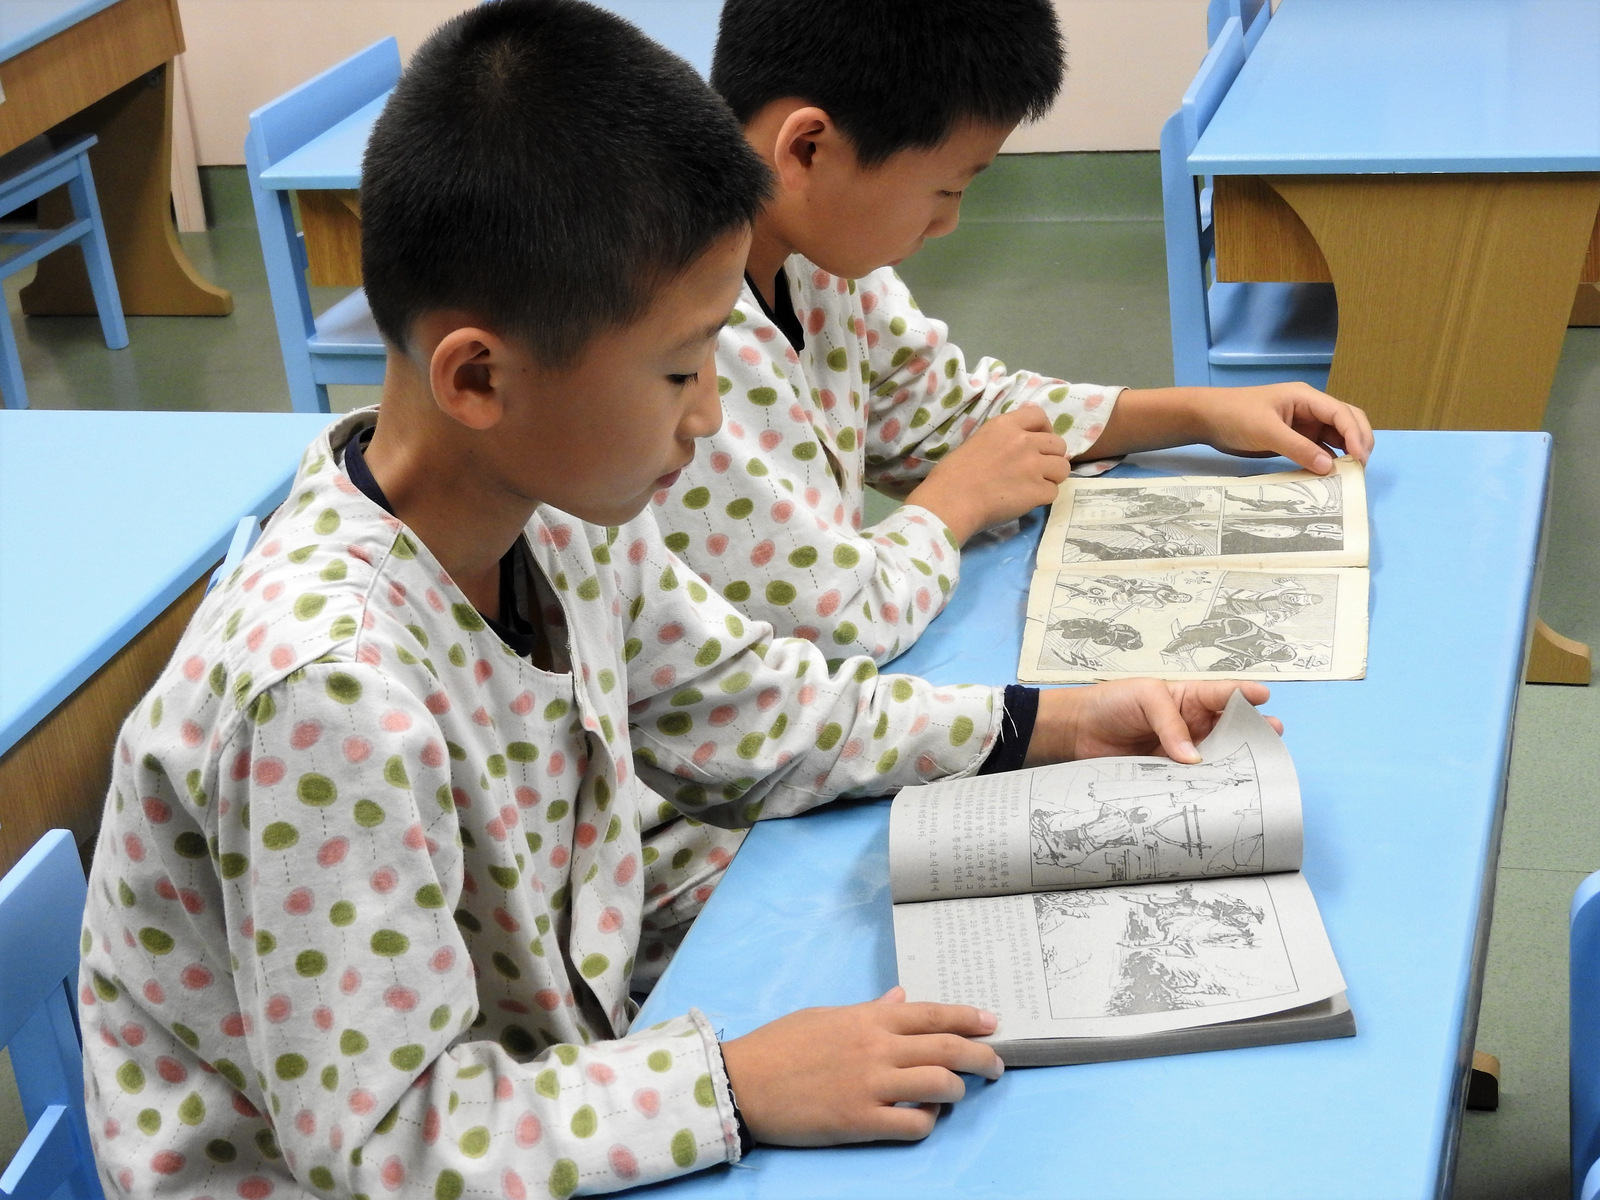 The Children's Hospital provides classes to inpatient children to continue their studies while in hospital. 